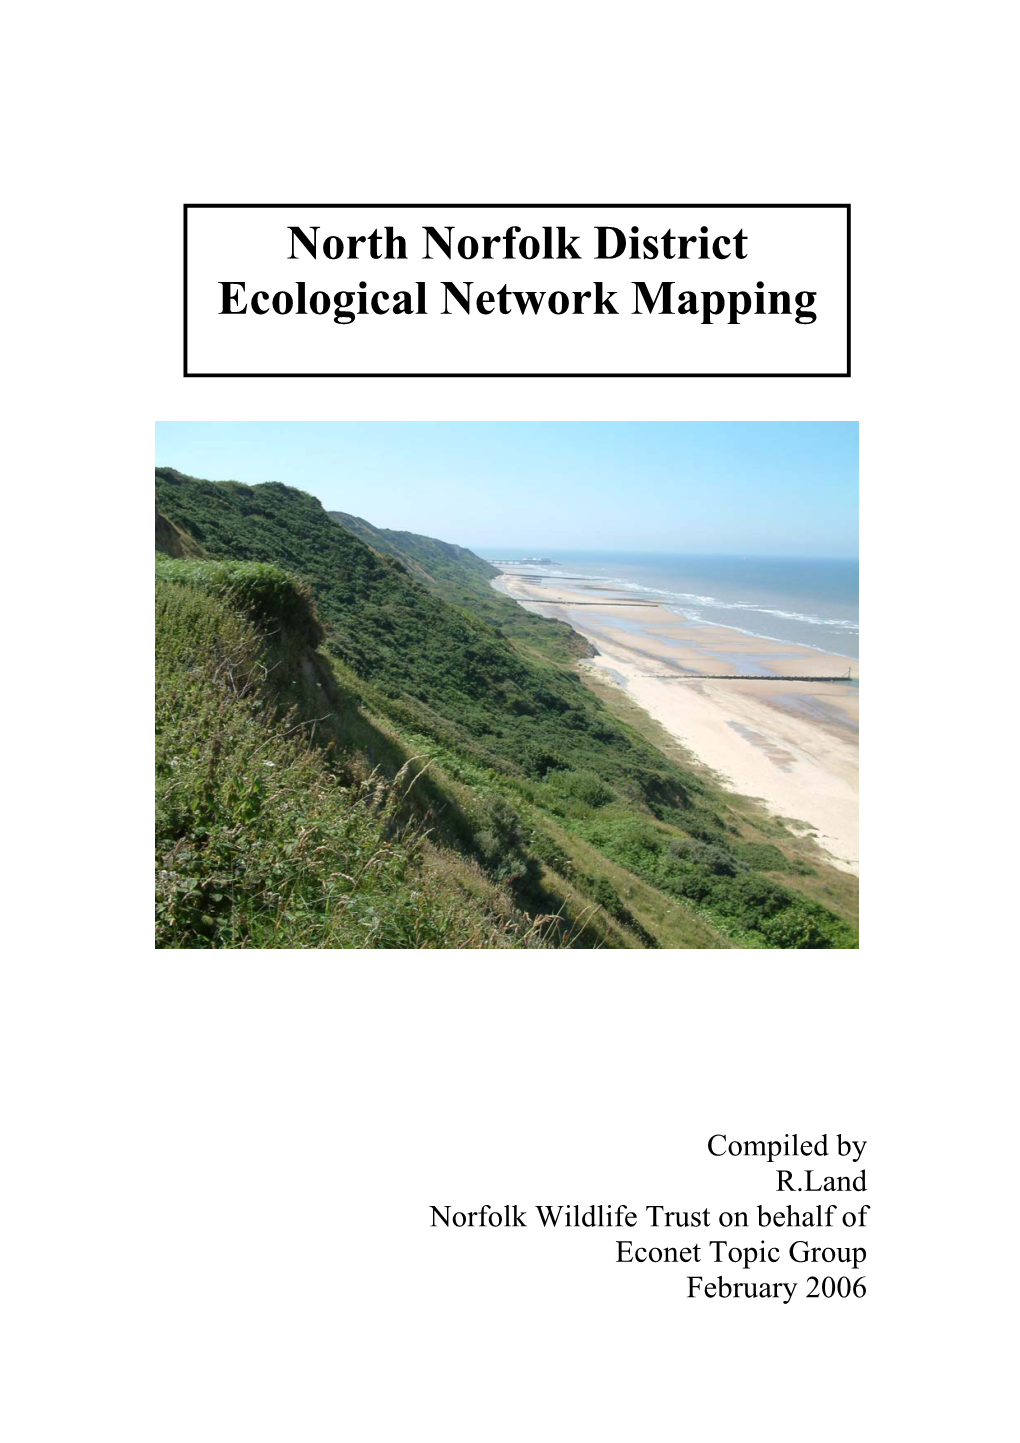 North Norfolk District Ecological Network Mapping